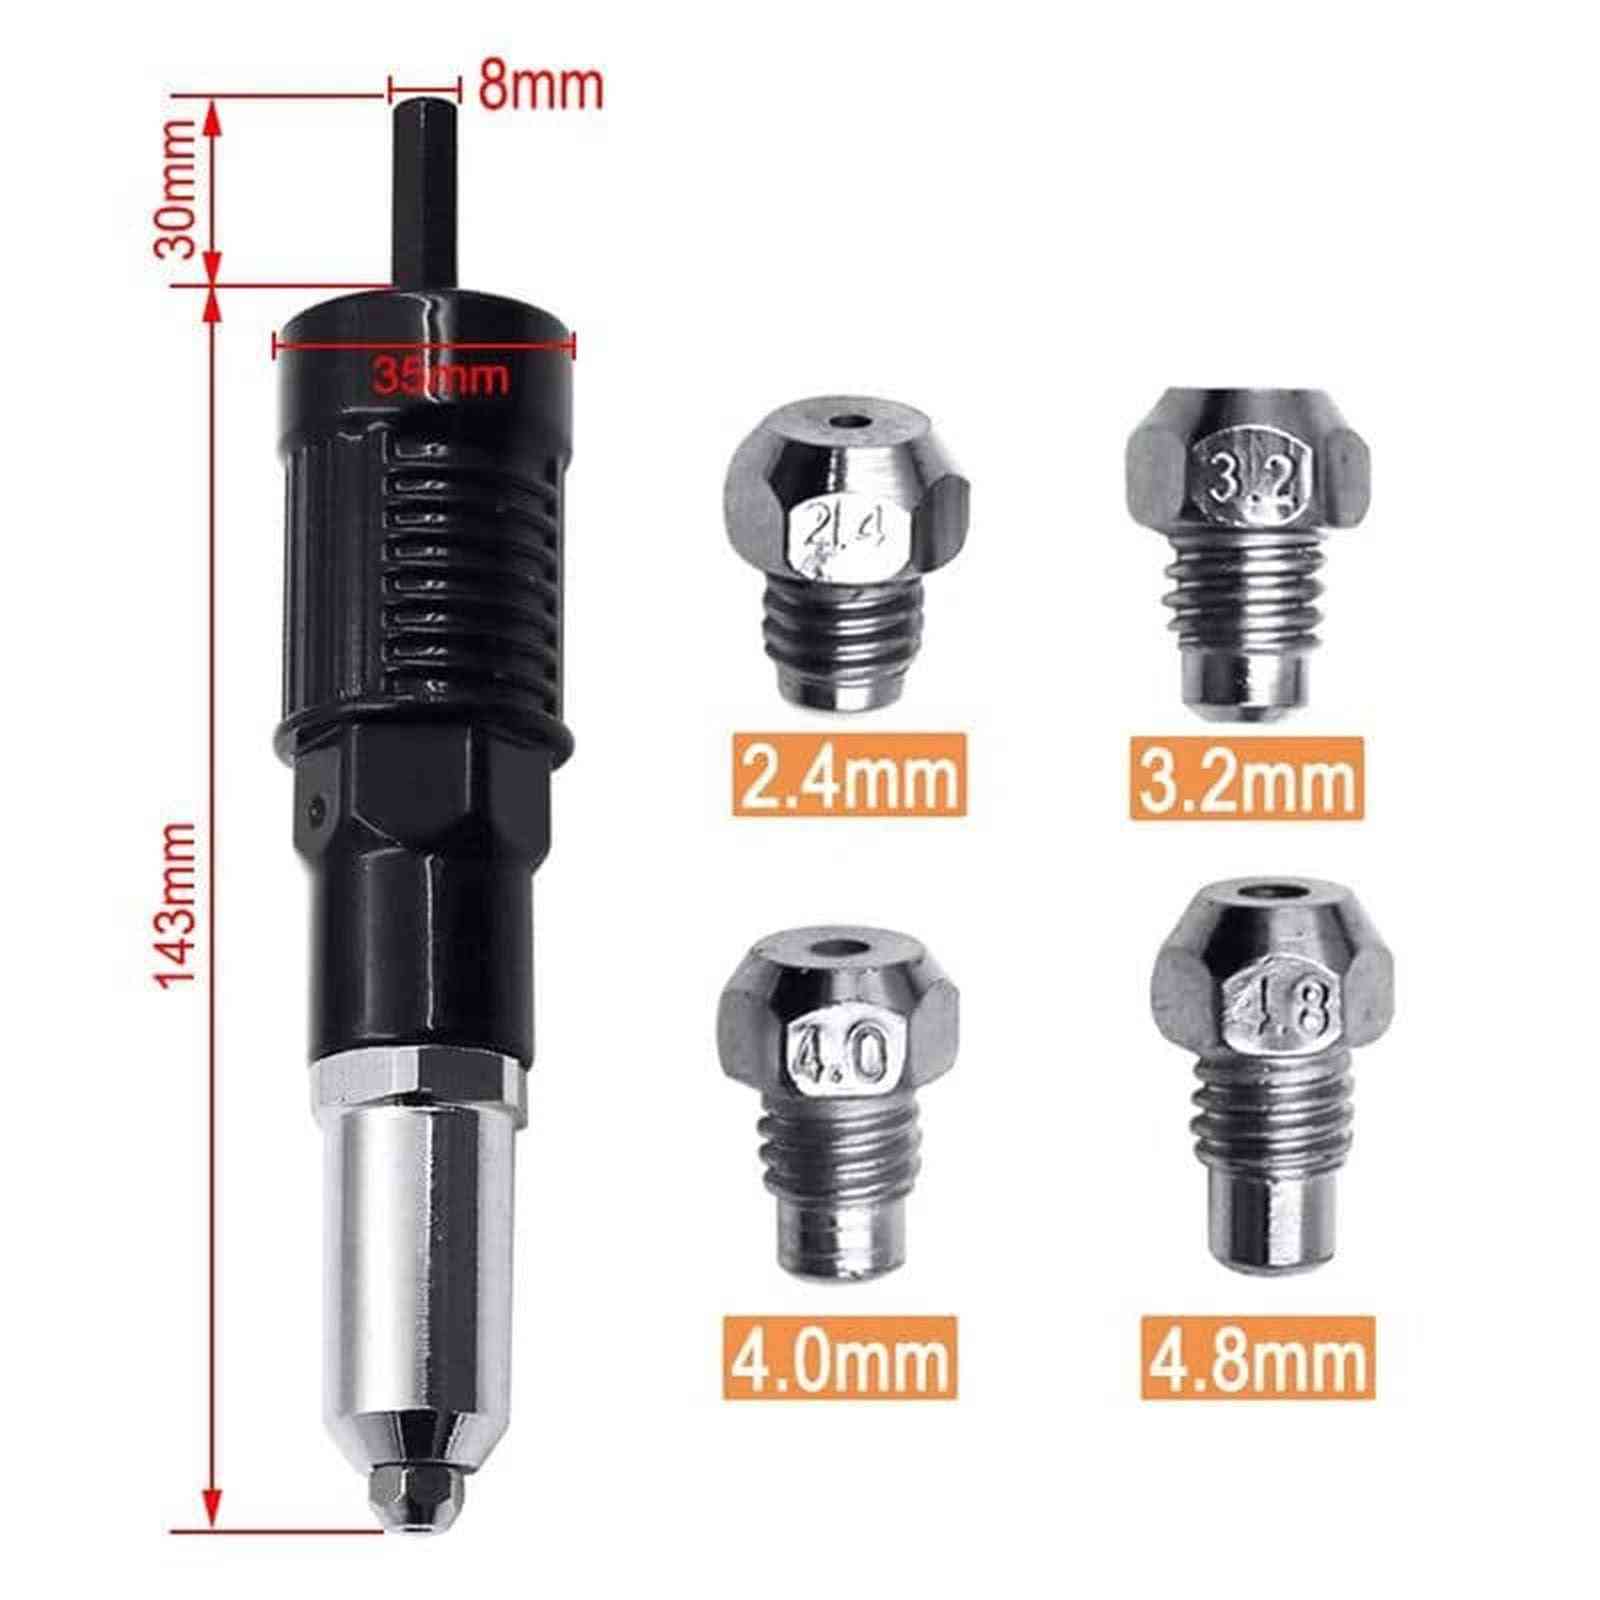 Rivets Adapter Kit With Different Matching Nozzle Bolts #t2g